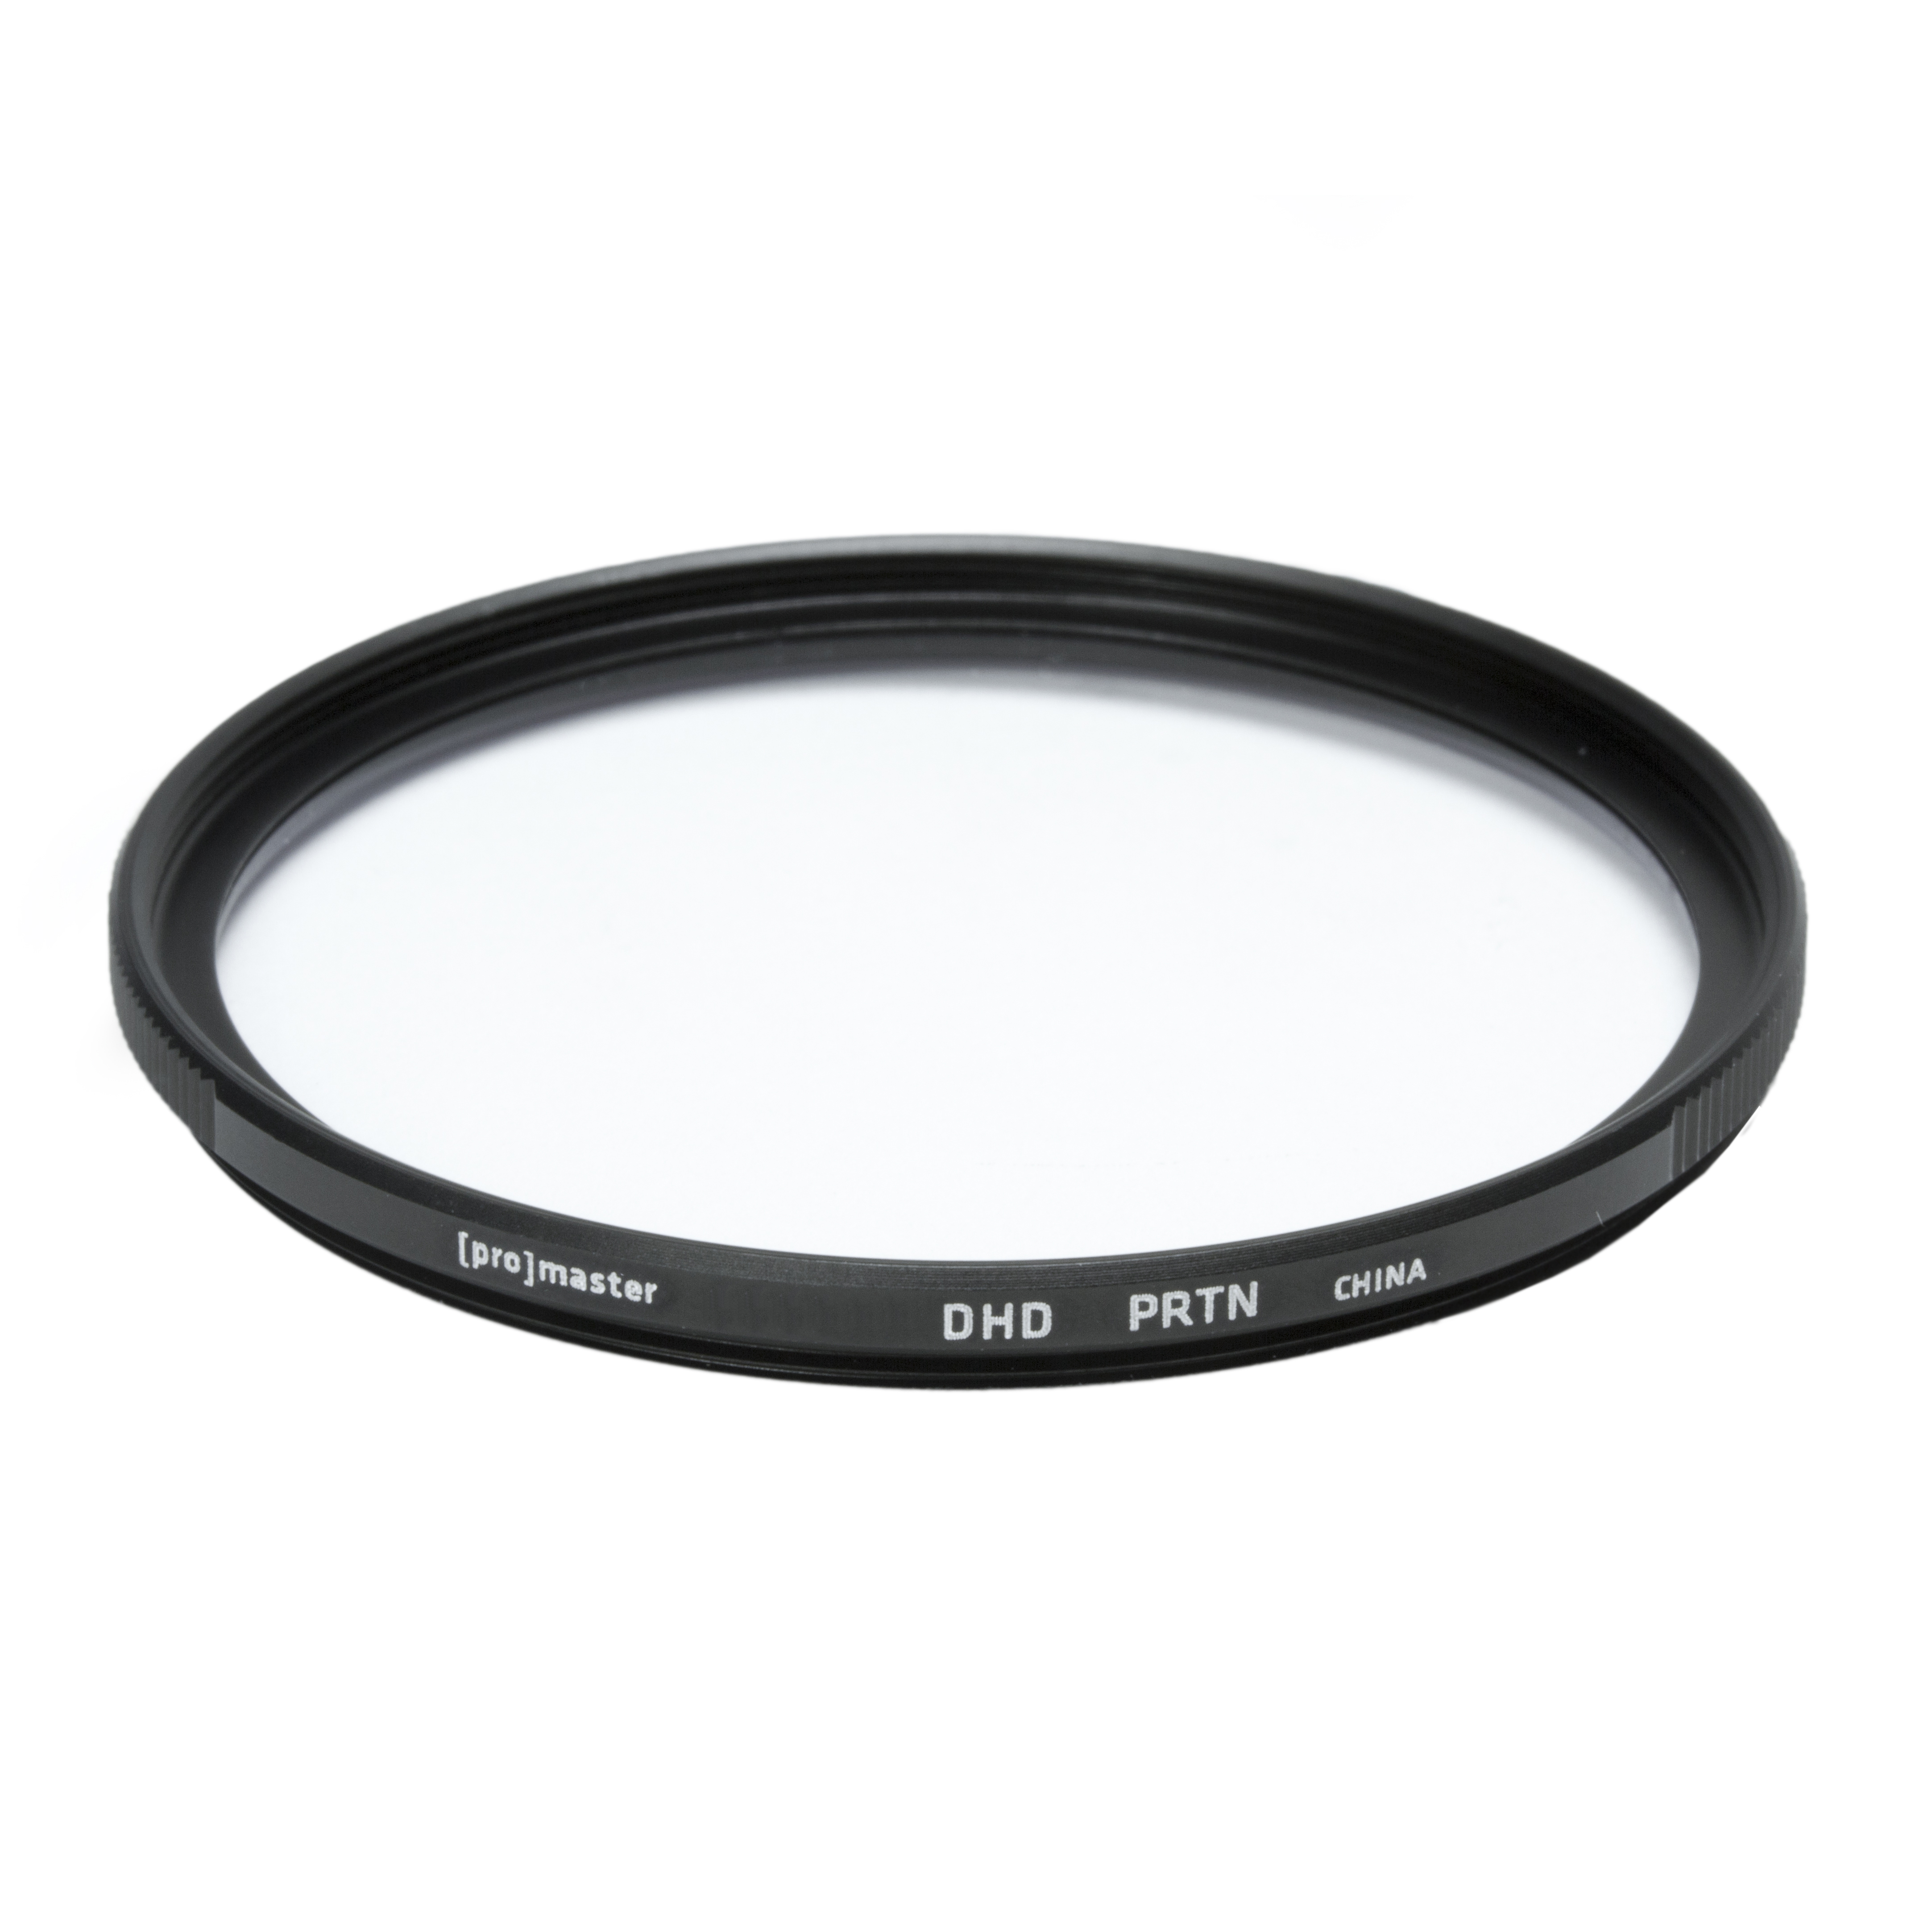 Promaster 4243 62mm Protection - Digital HD Filter